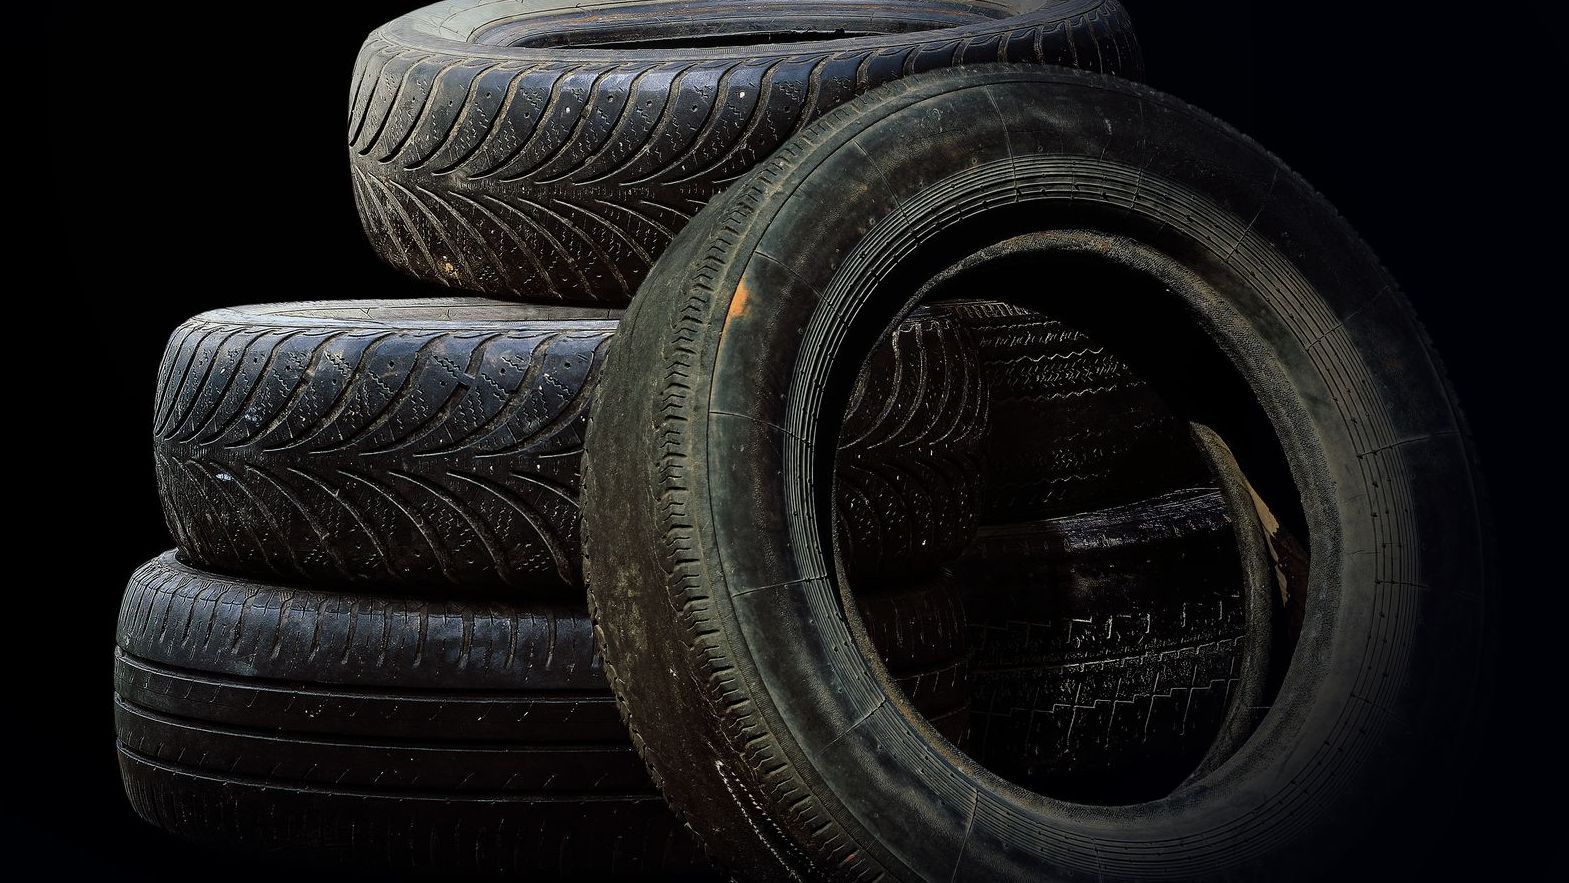 stack of tyres against a black background; the tyres look worn and used